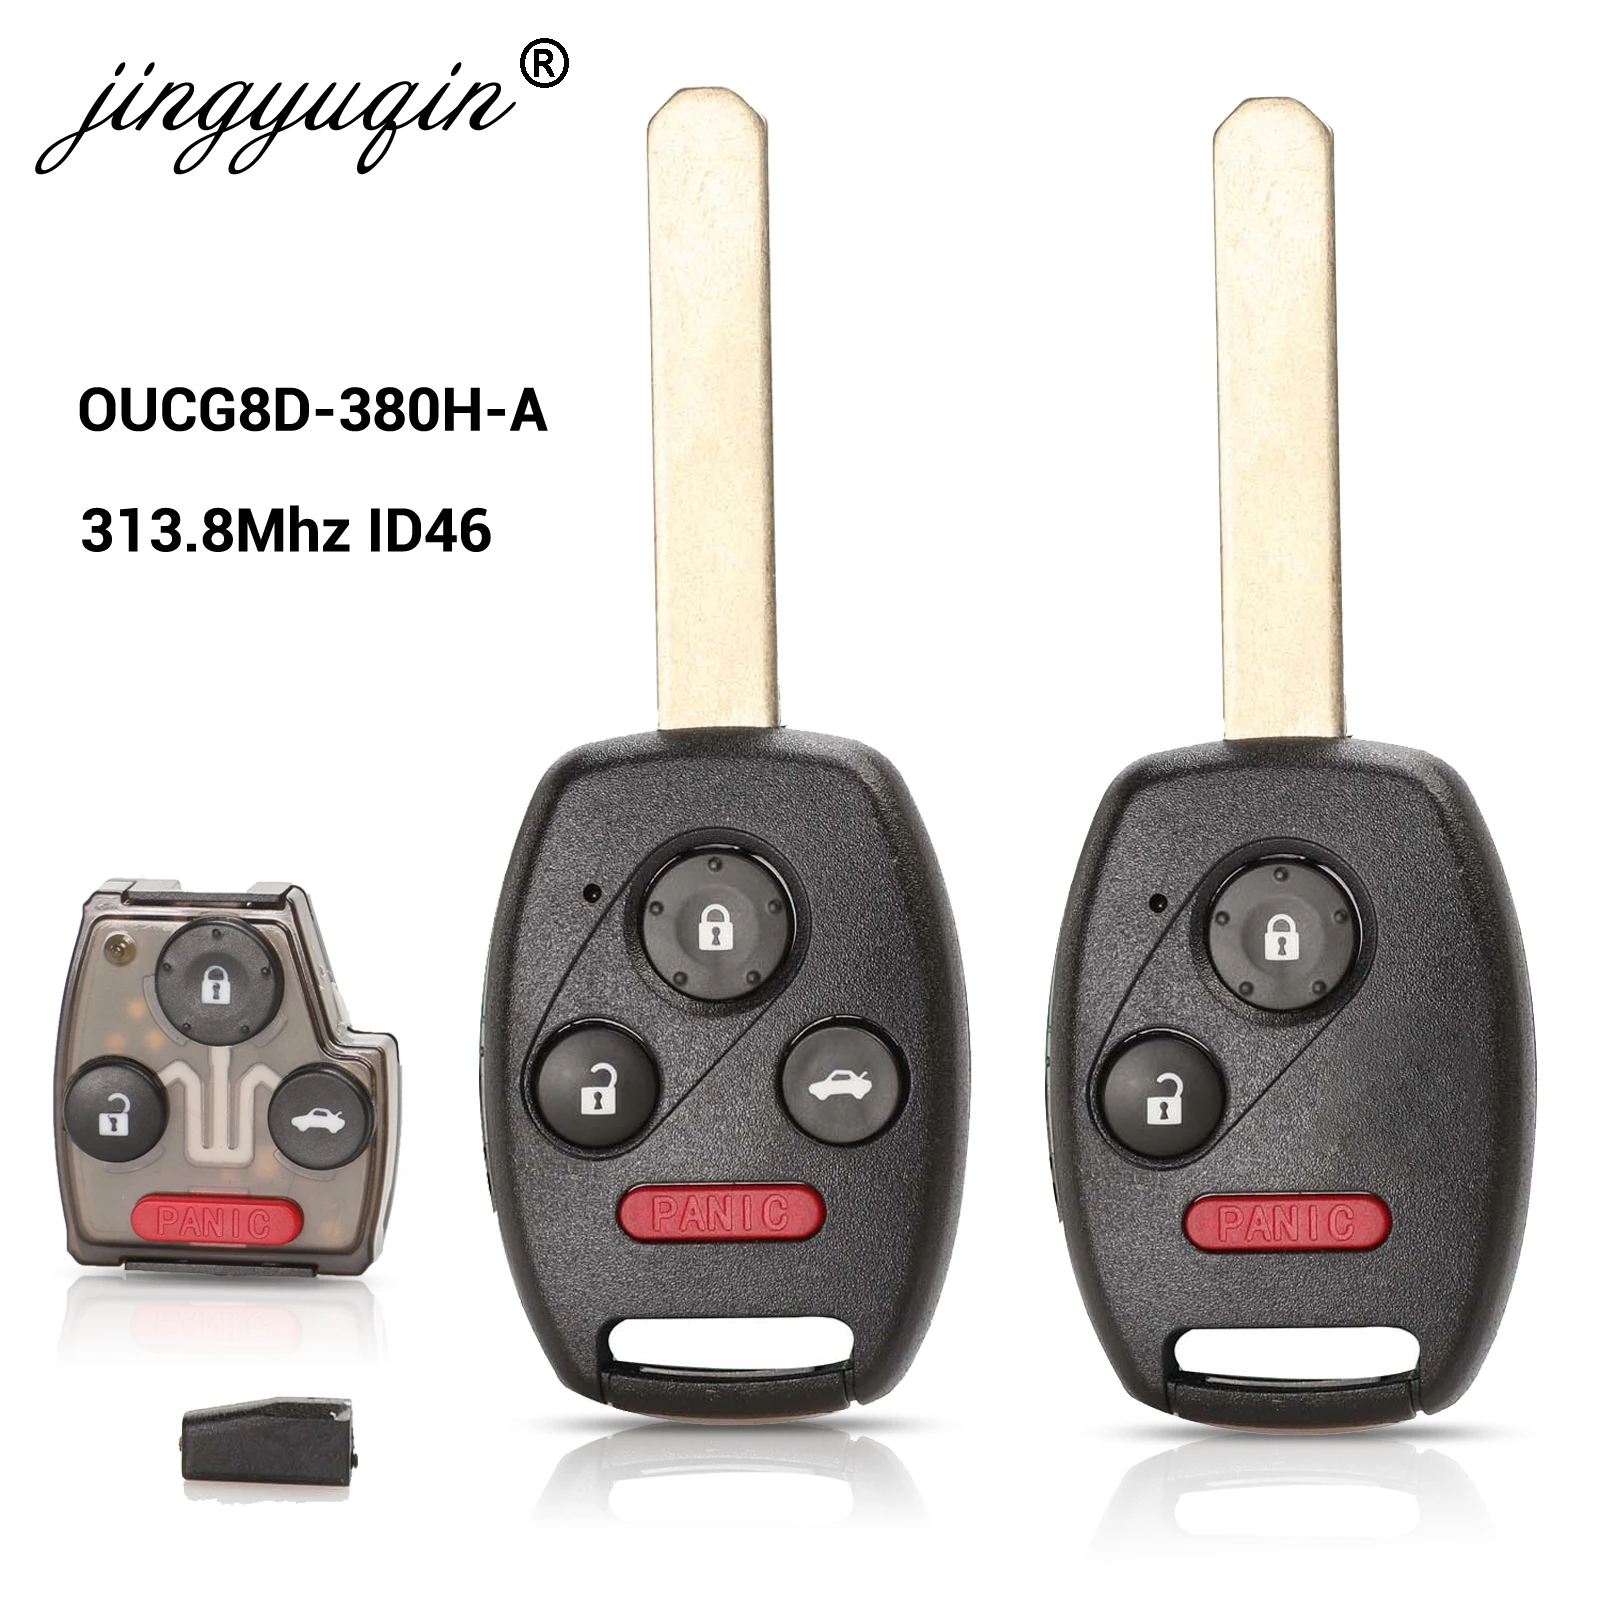 jingyuqin Car Remote Key for Honda Odyssey 2005-2010 Accord 2003-2007 OUCG8D-380H-A 313.8MHz 3/4 Buttons Fob Control ID46(7941)